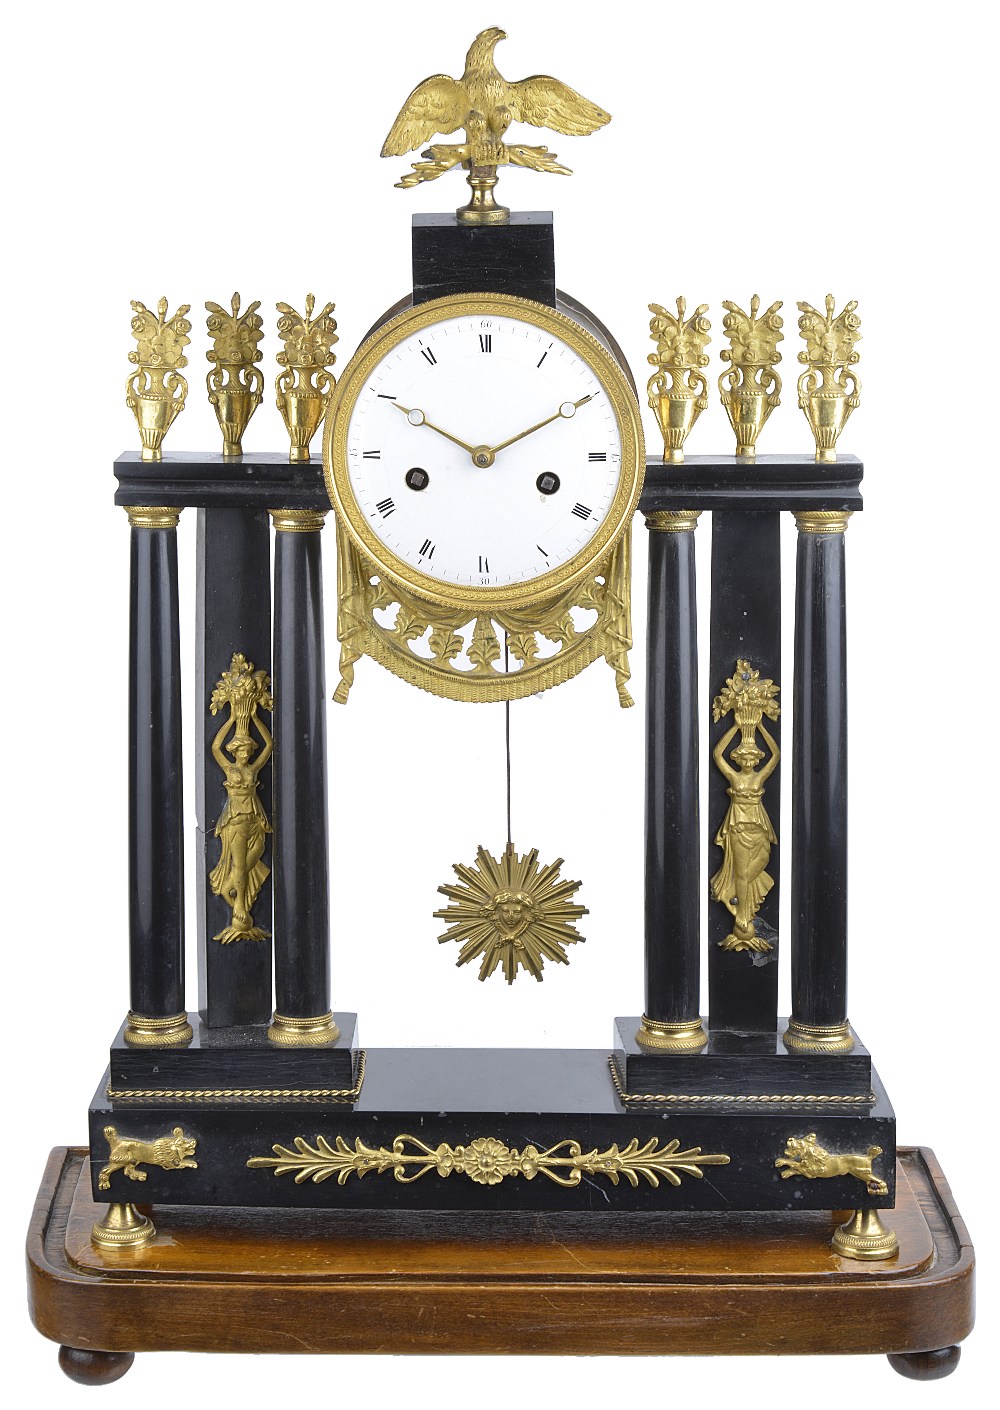 AN ORMOLU-MOUNTED BLACK MARBLE PORTICO CLOCK, FRENCH, CIRCA 1800drum movement with silk suspension